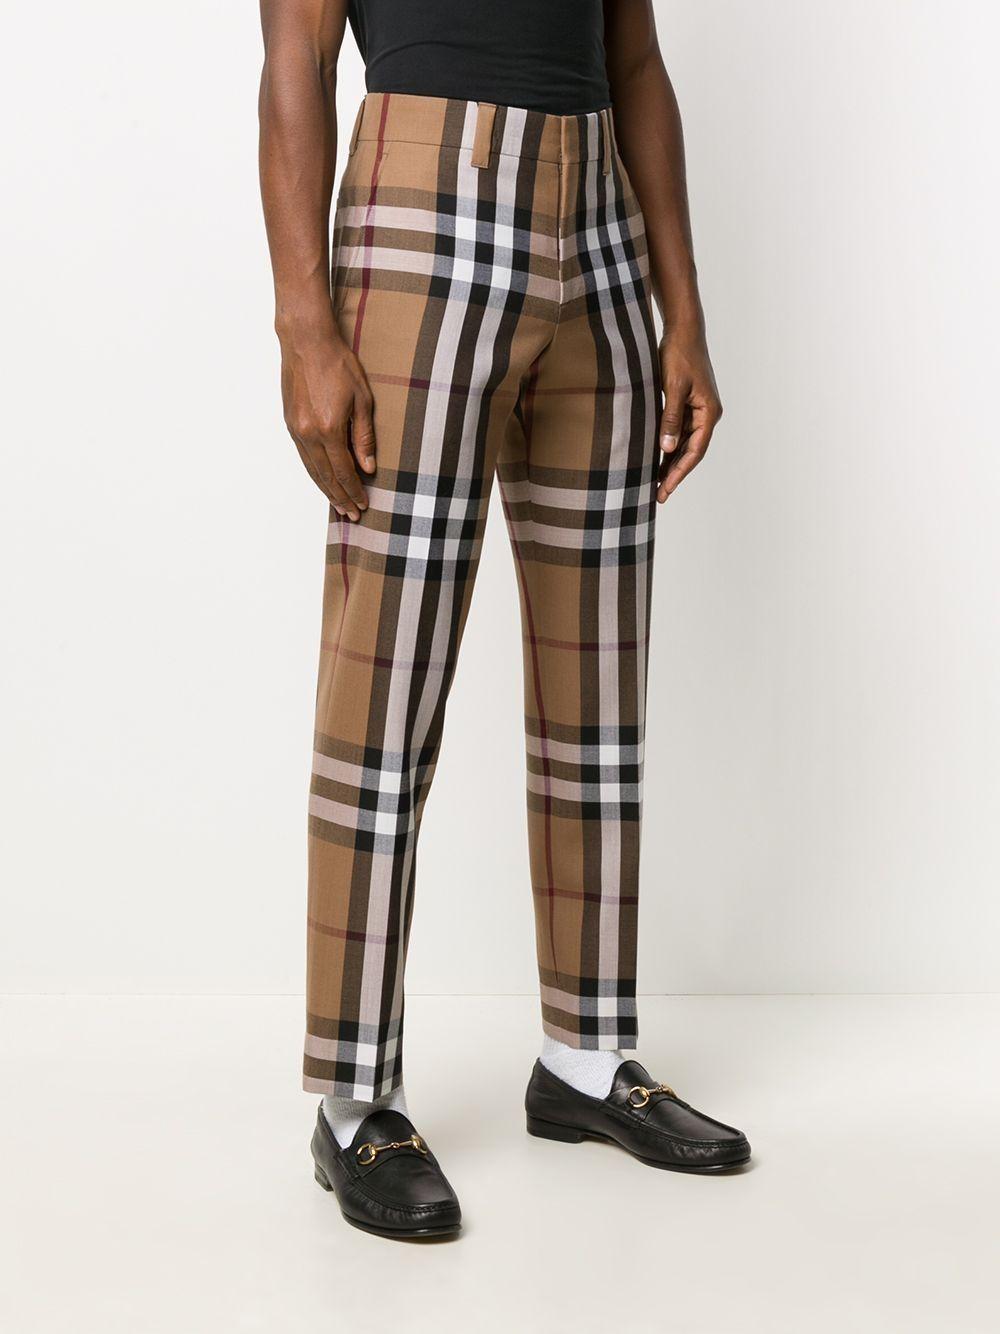 Burberry House Check Wool Trousers 50 Wool in Brown,Black,White 